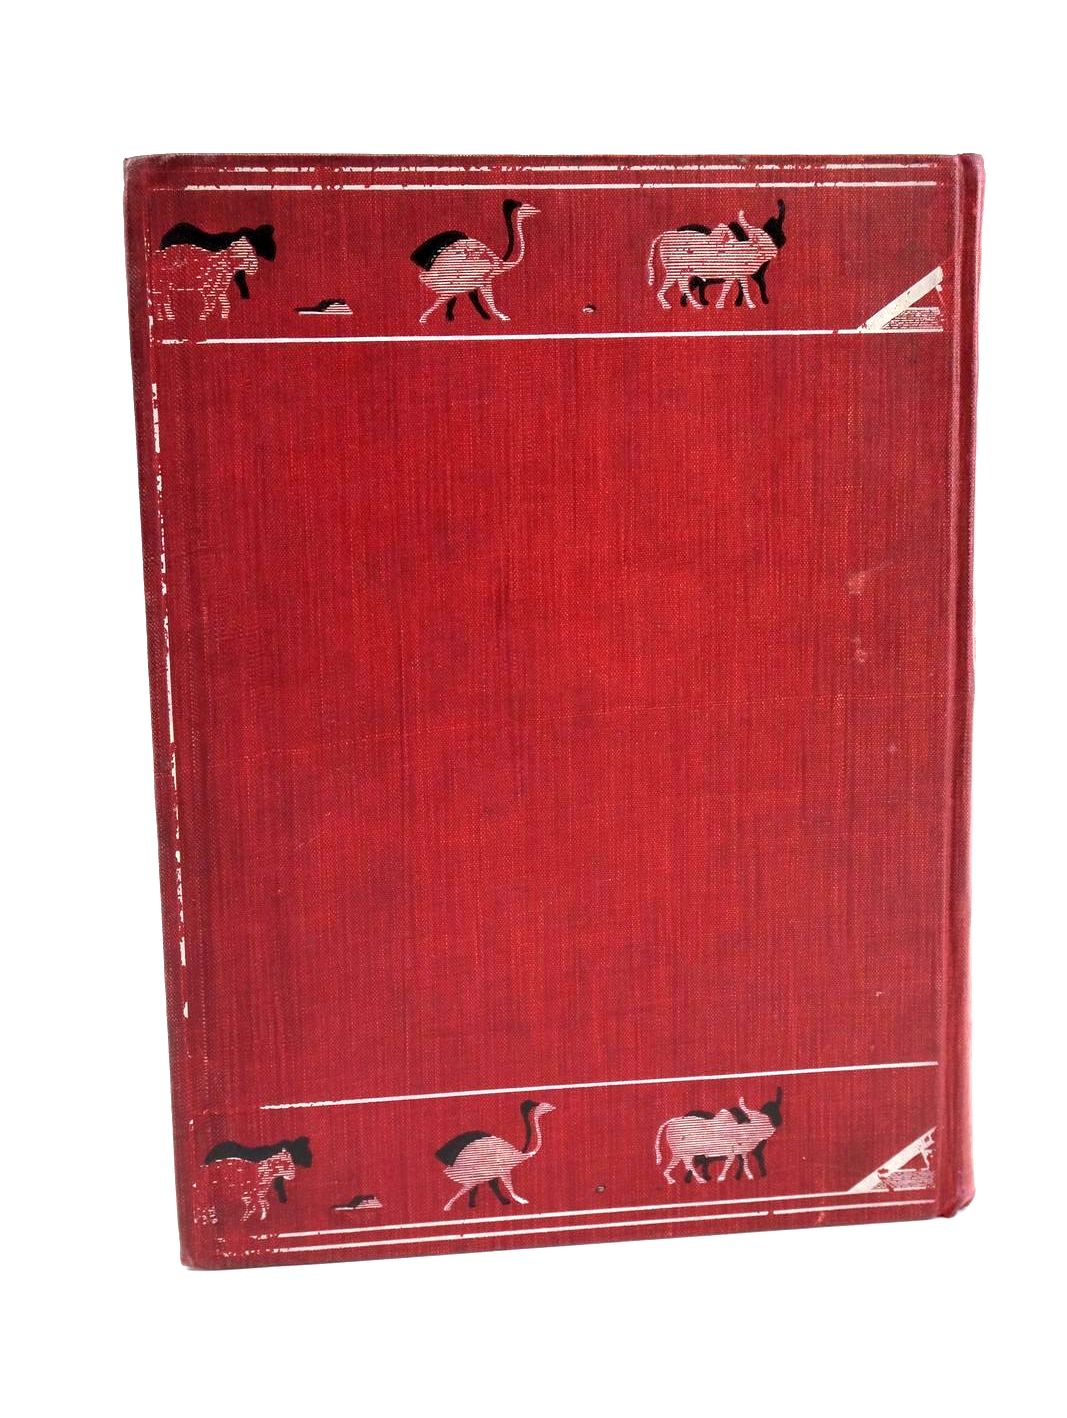 Photo of JUST SO STORIES written by Kipling, Rudyard illustrated by Kipling, Rudyard published by Macmillan & Co. Ltd. (STOCK CODE: 1324332)  for sale by Stella & Rose's Books